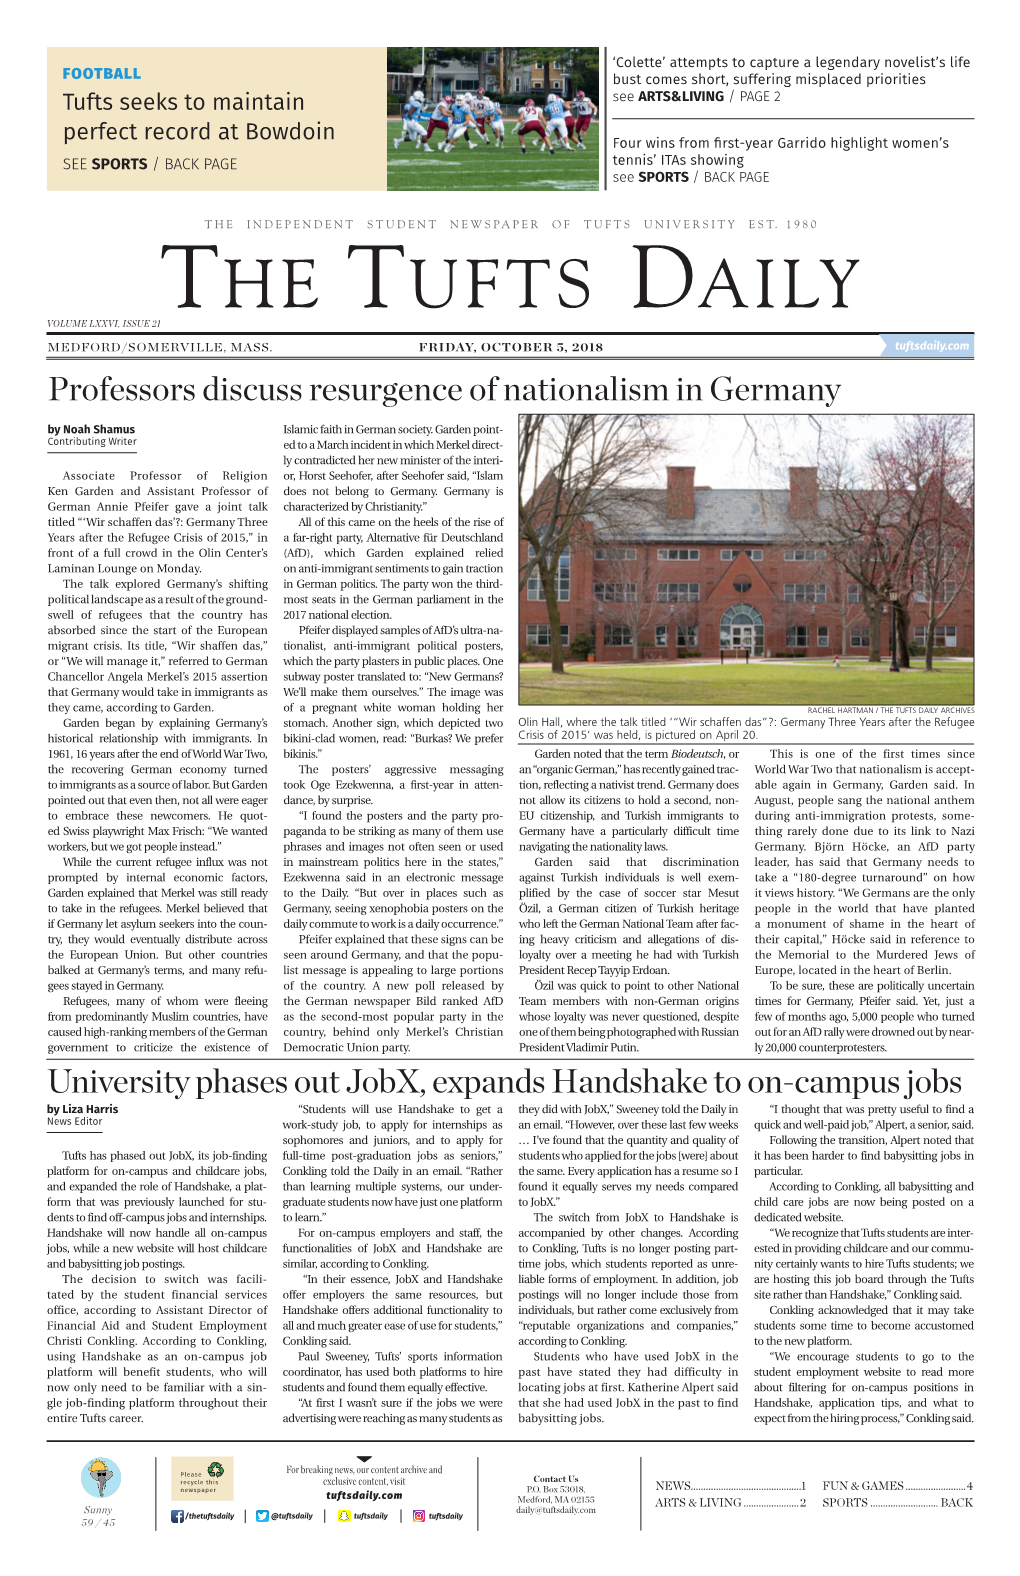 The Tufts Daily Volume Lxxvi, Issue 21